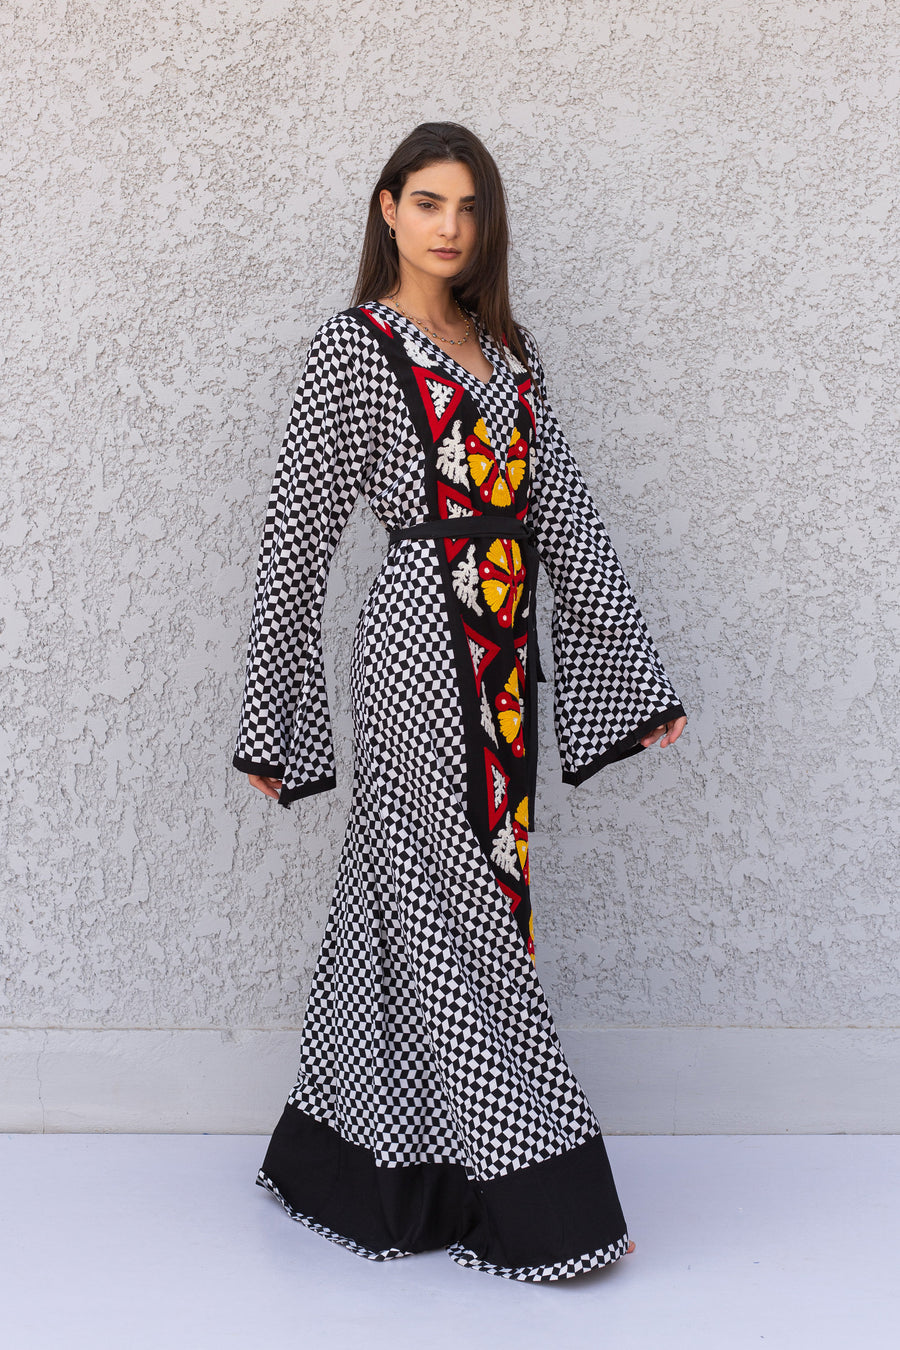 Beautiful Checkered black embroidered Caftan, cotton caftans for women, Kaftans, embroidered Caftan, Caftan maxi dress, Caftans for women